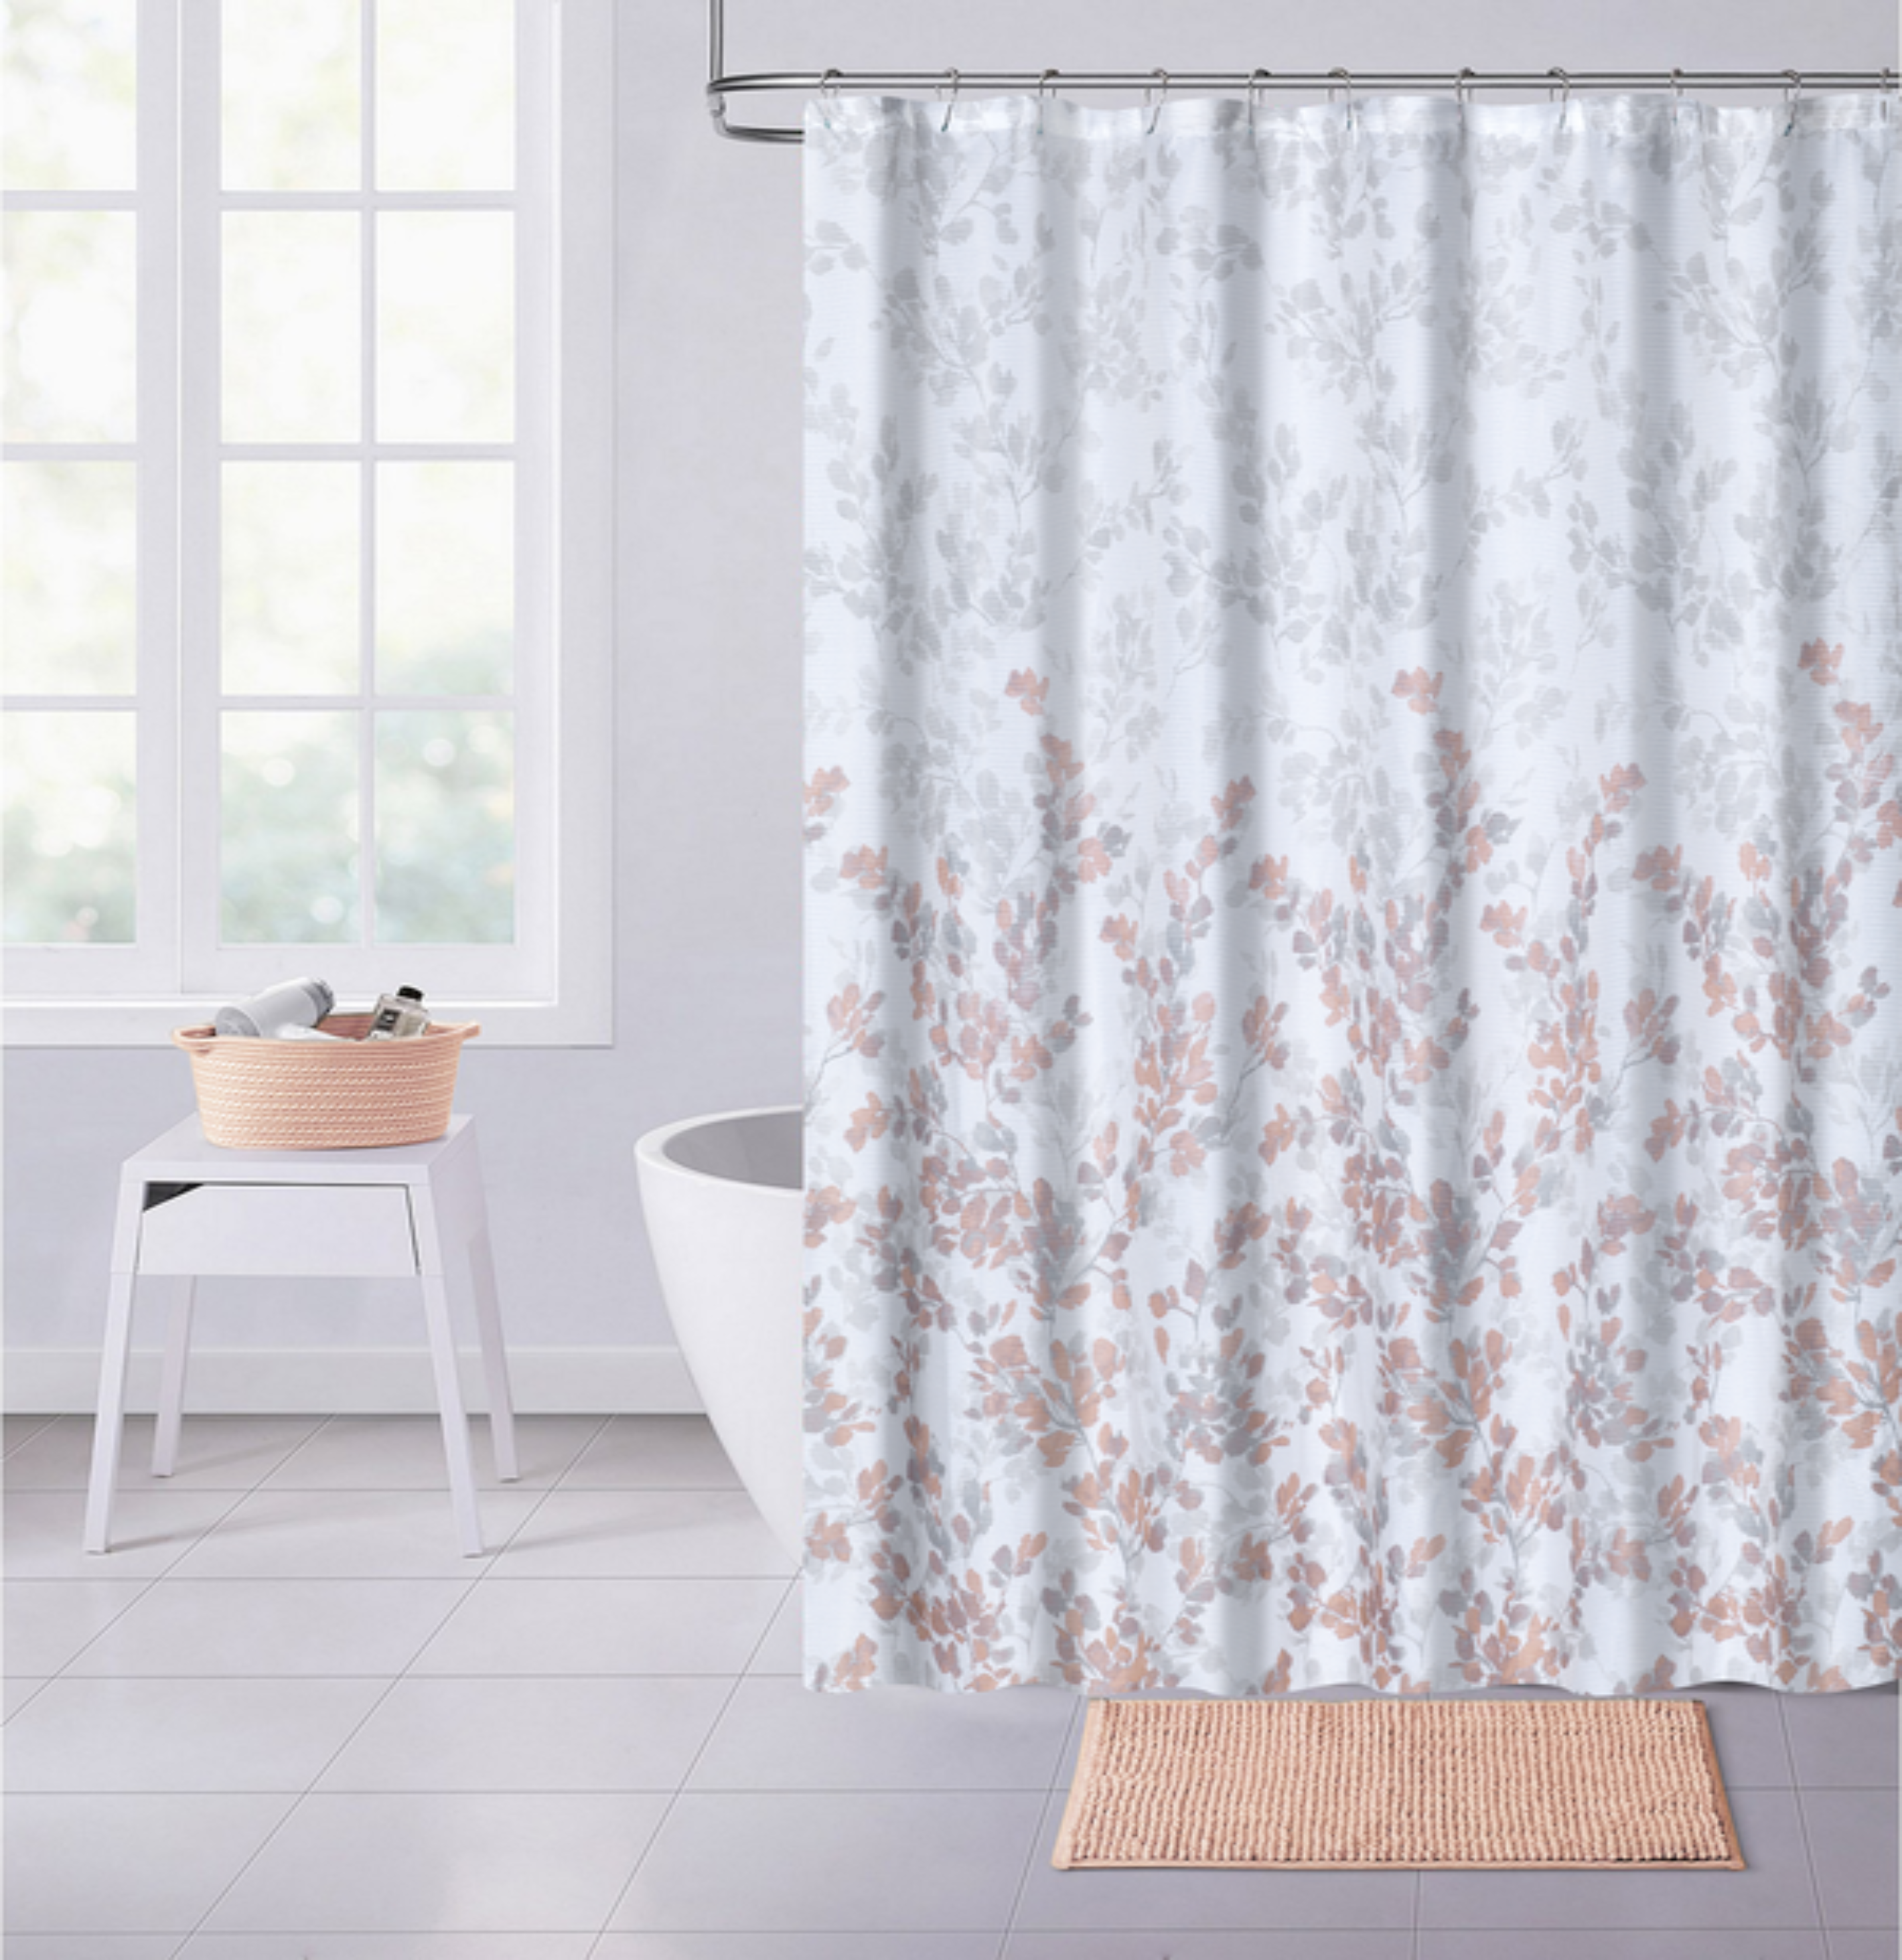 Dainty Home Printed Waffle 3D Textured Waffle Weave Textured Spring Designed Fabric Shower Curtain